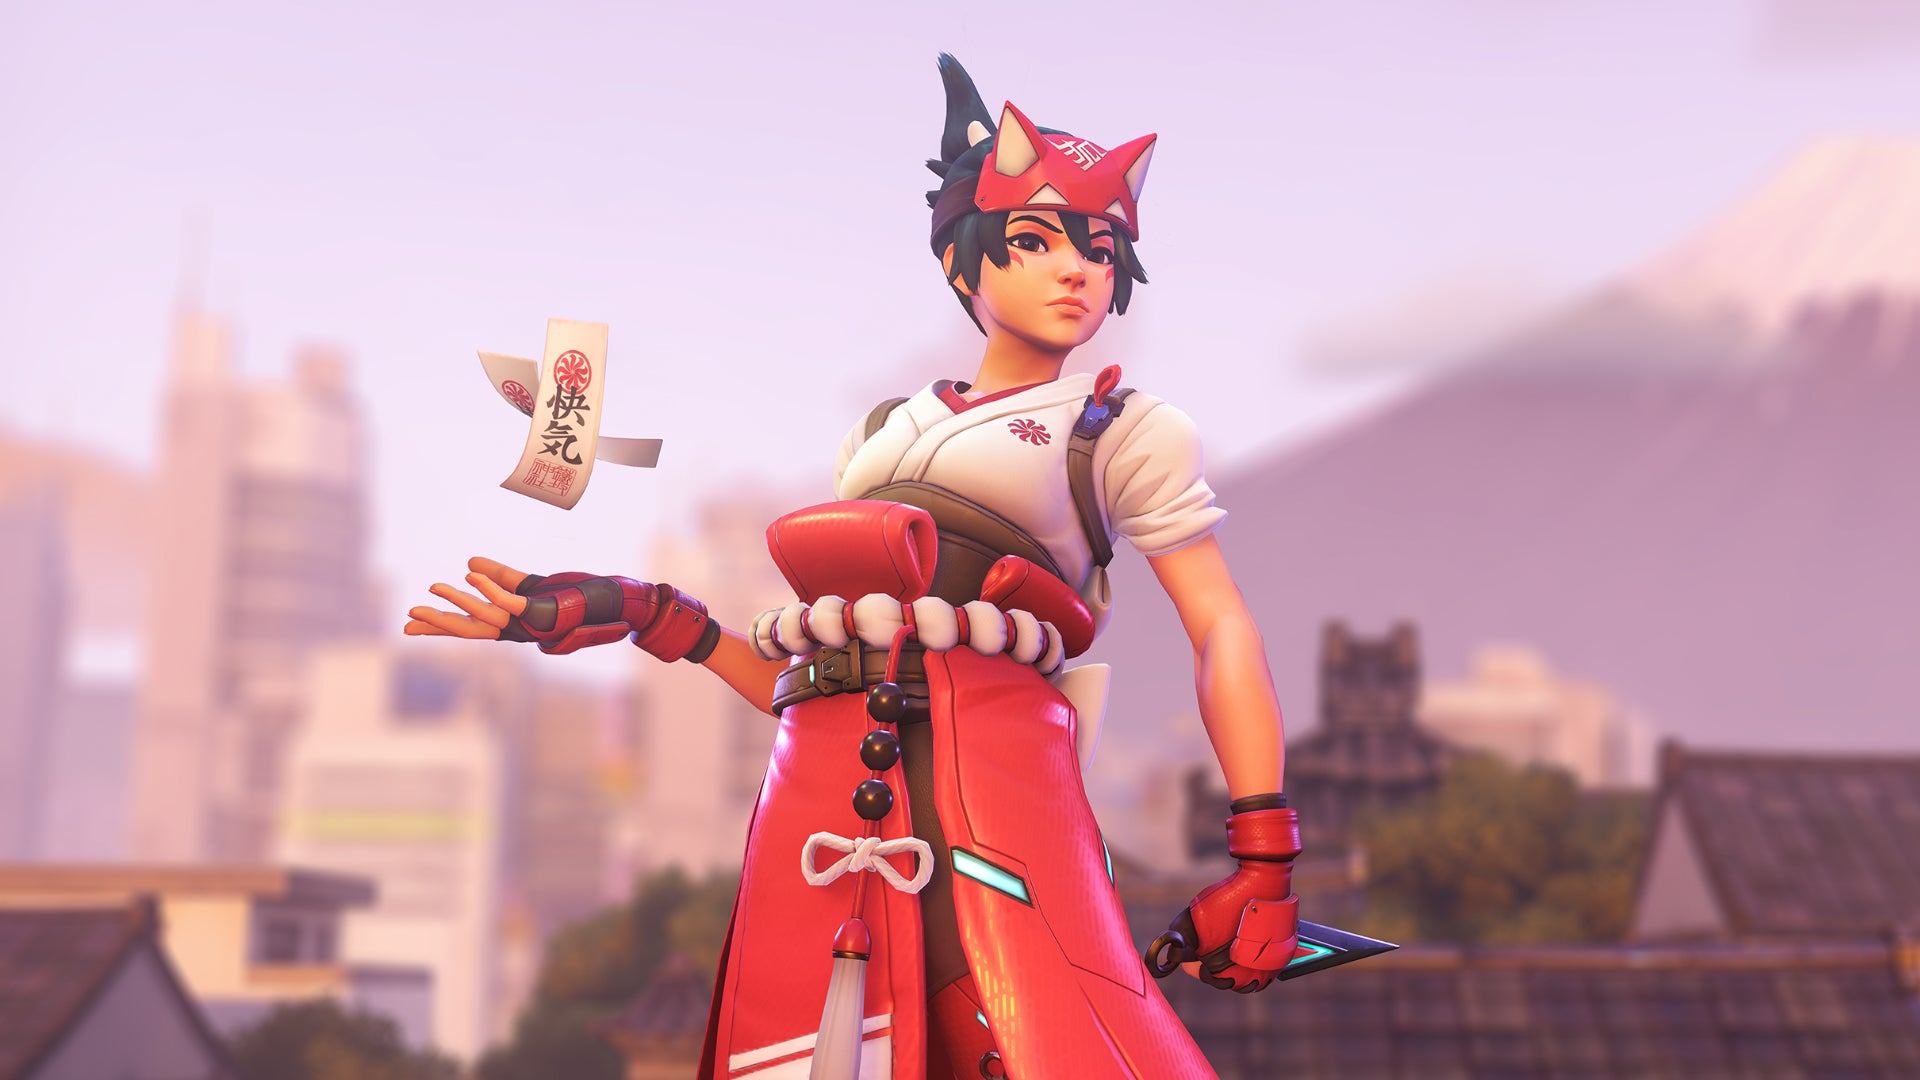 Kiriko, a hero in Overwatch 2, stands before the camera with her Kunai in one hand and her Healing Ofuda floating above her other hand.